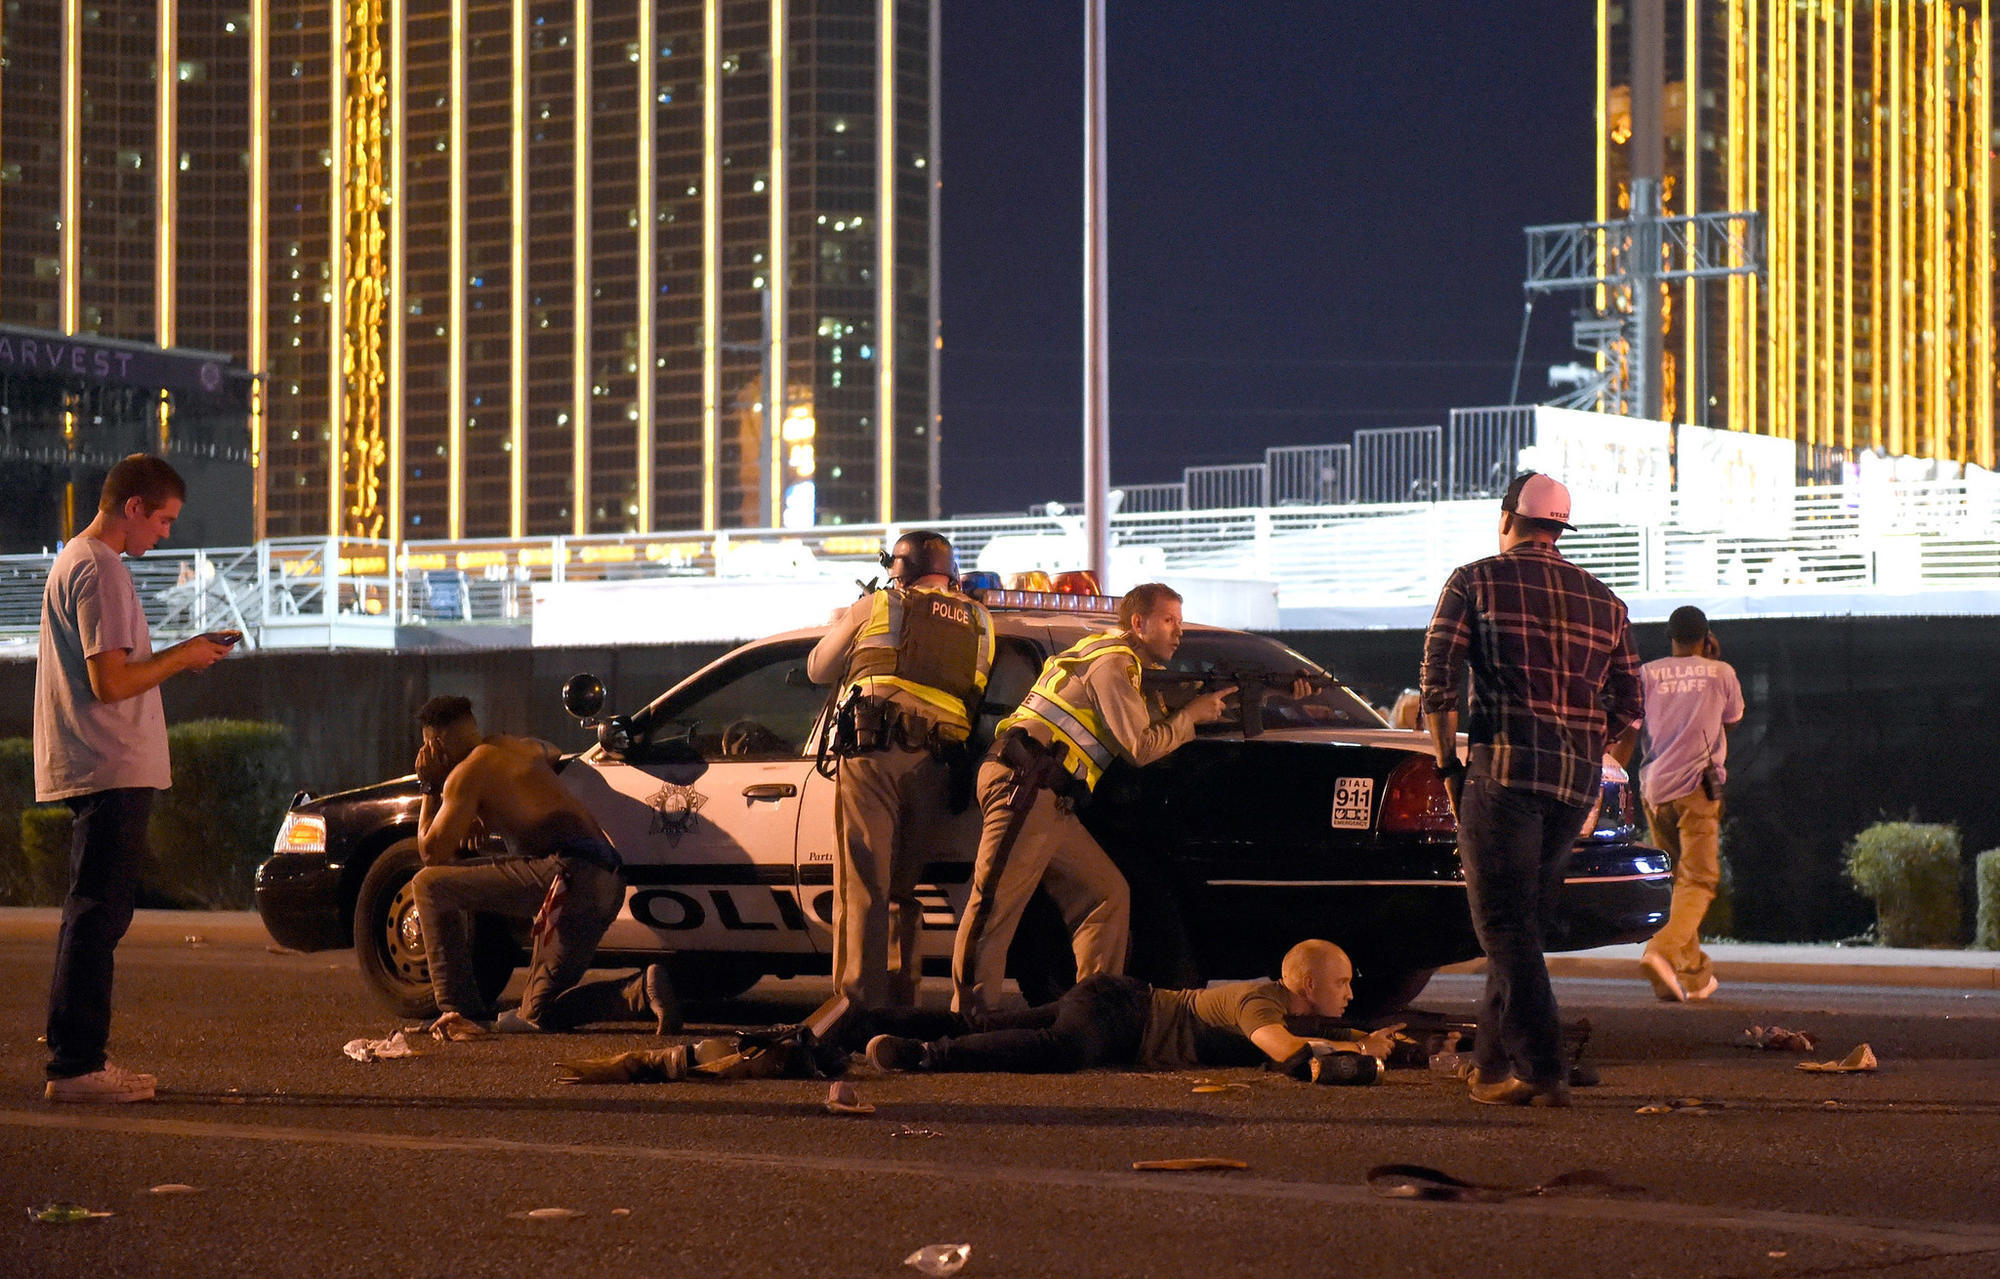 Image result for LAS VEGAS GUNMAN SHOT SECURITY GUARD A FULL SIX MINUTES BEFORE OPENING FIRE ON CONCERTGOERS, POLICE REVEAL